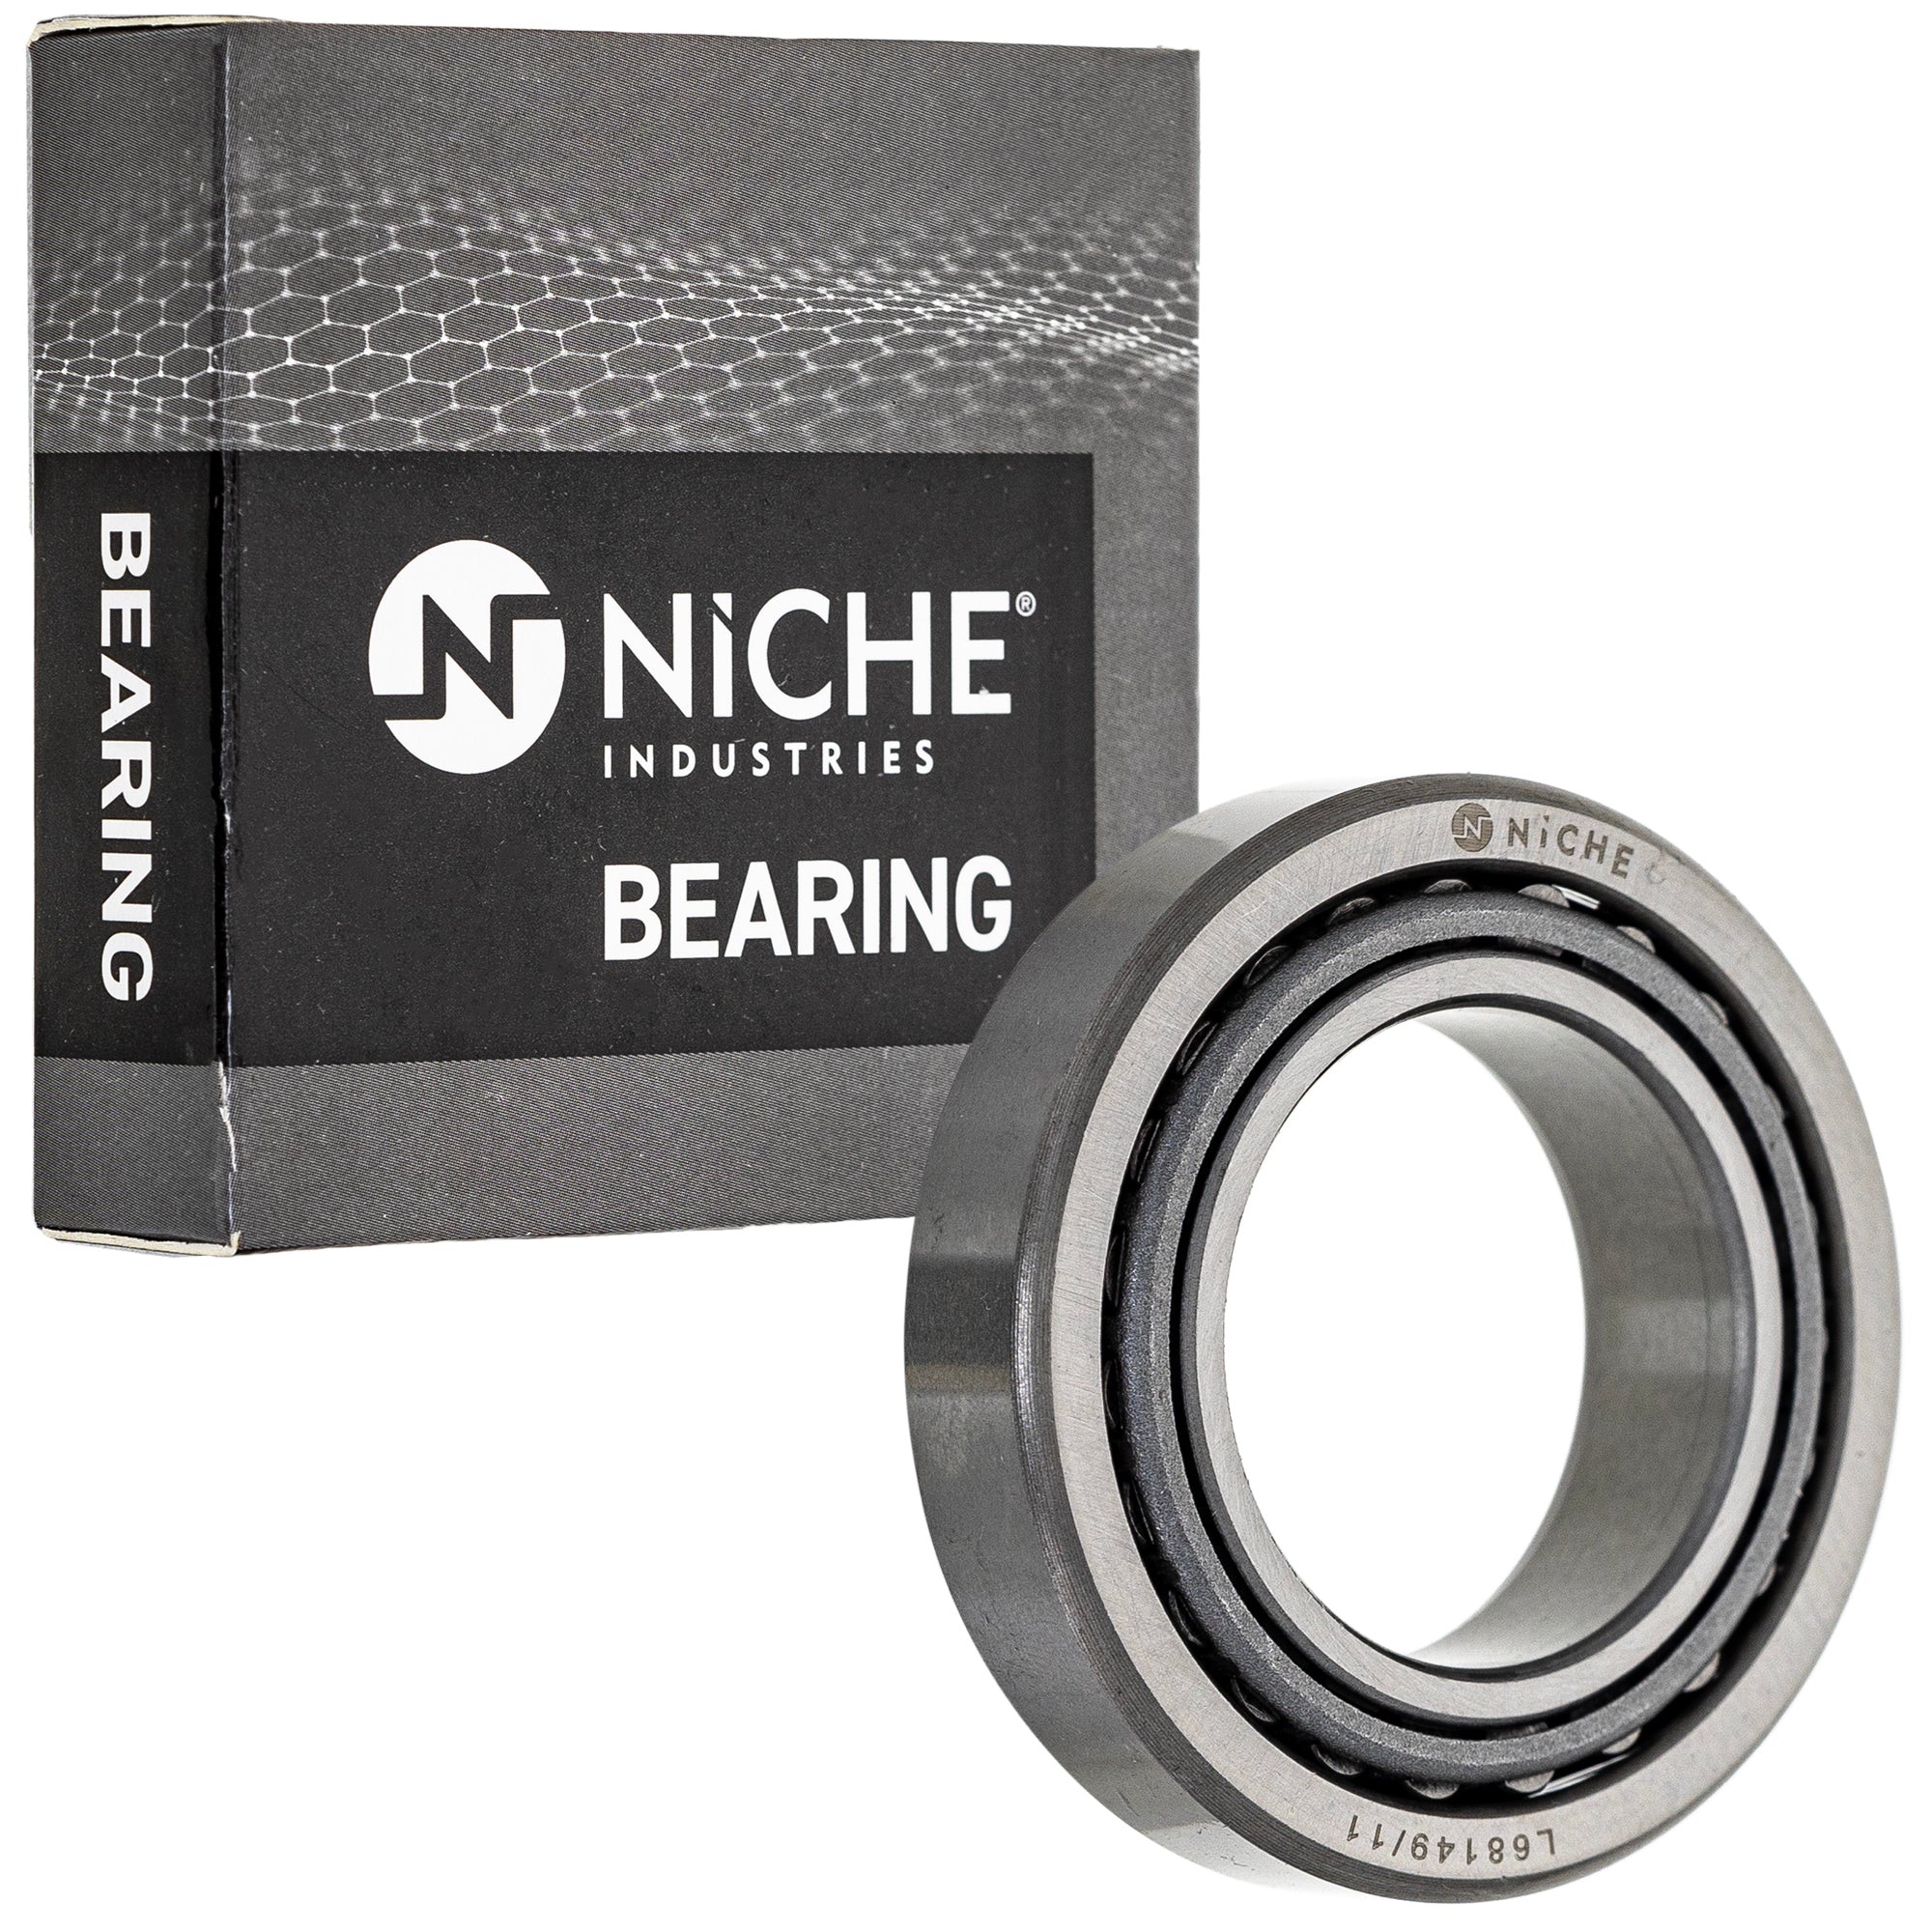 NICHE 519-CBB2285R Bearing 2-Pack for zOTHER Xpress Xplorer Xpedition